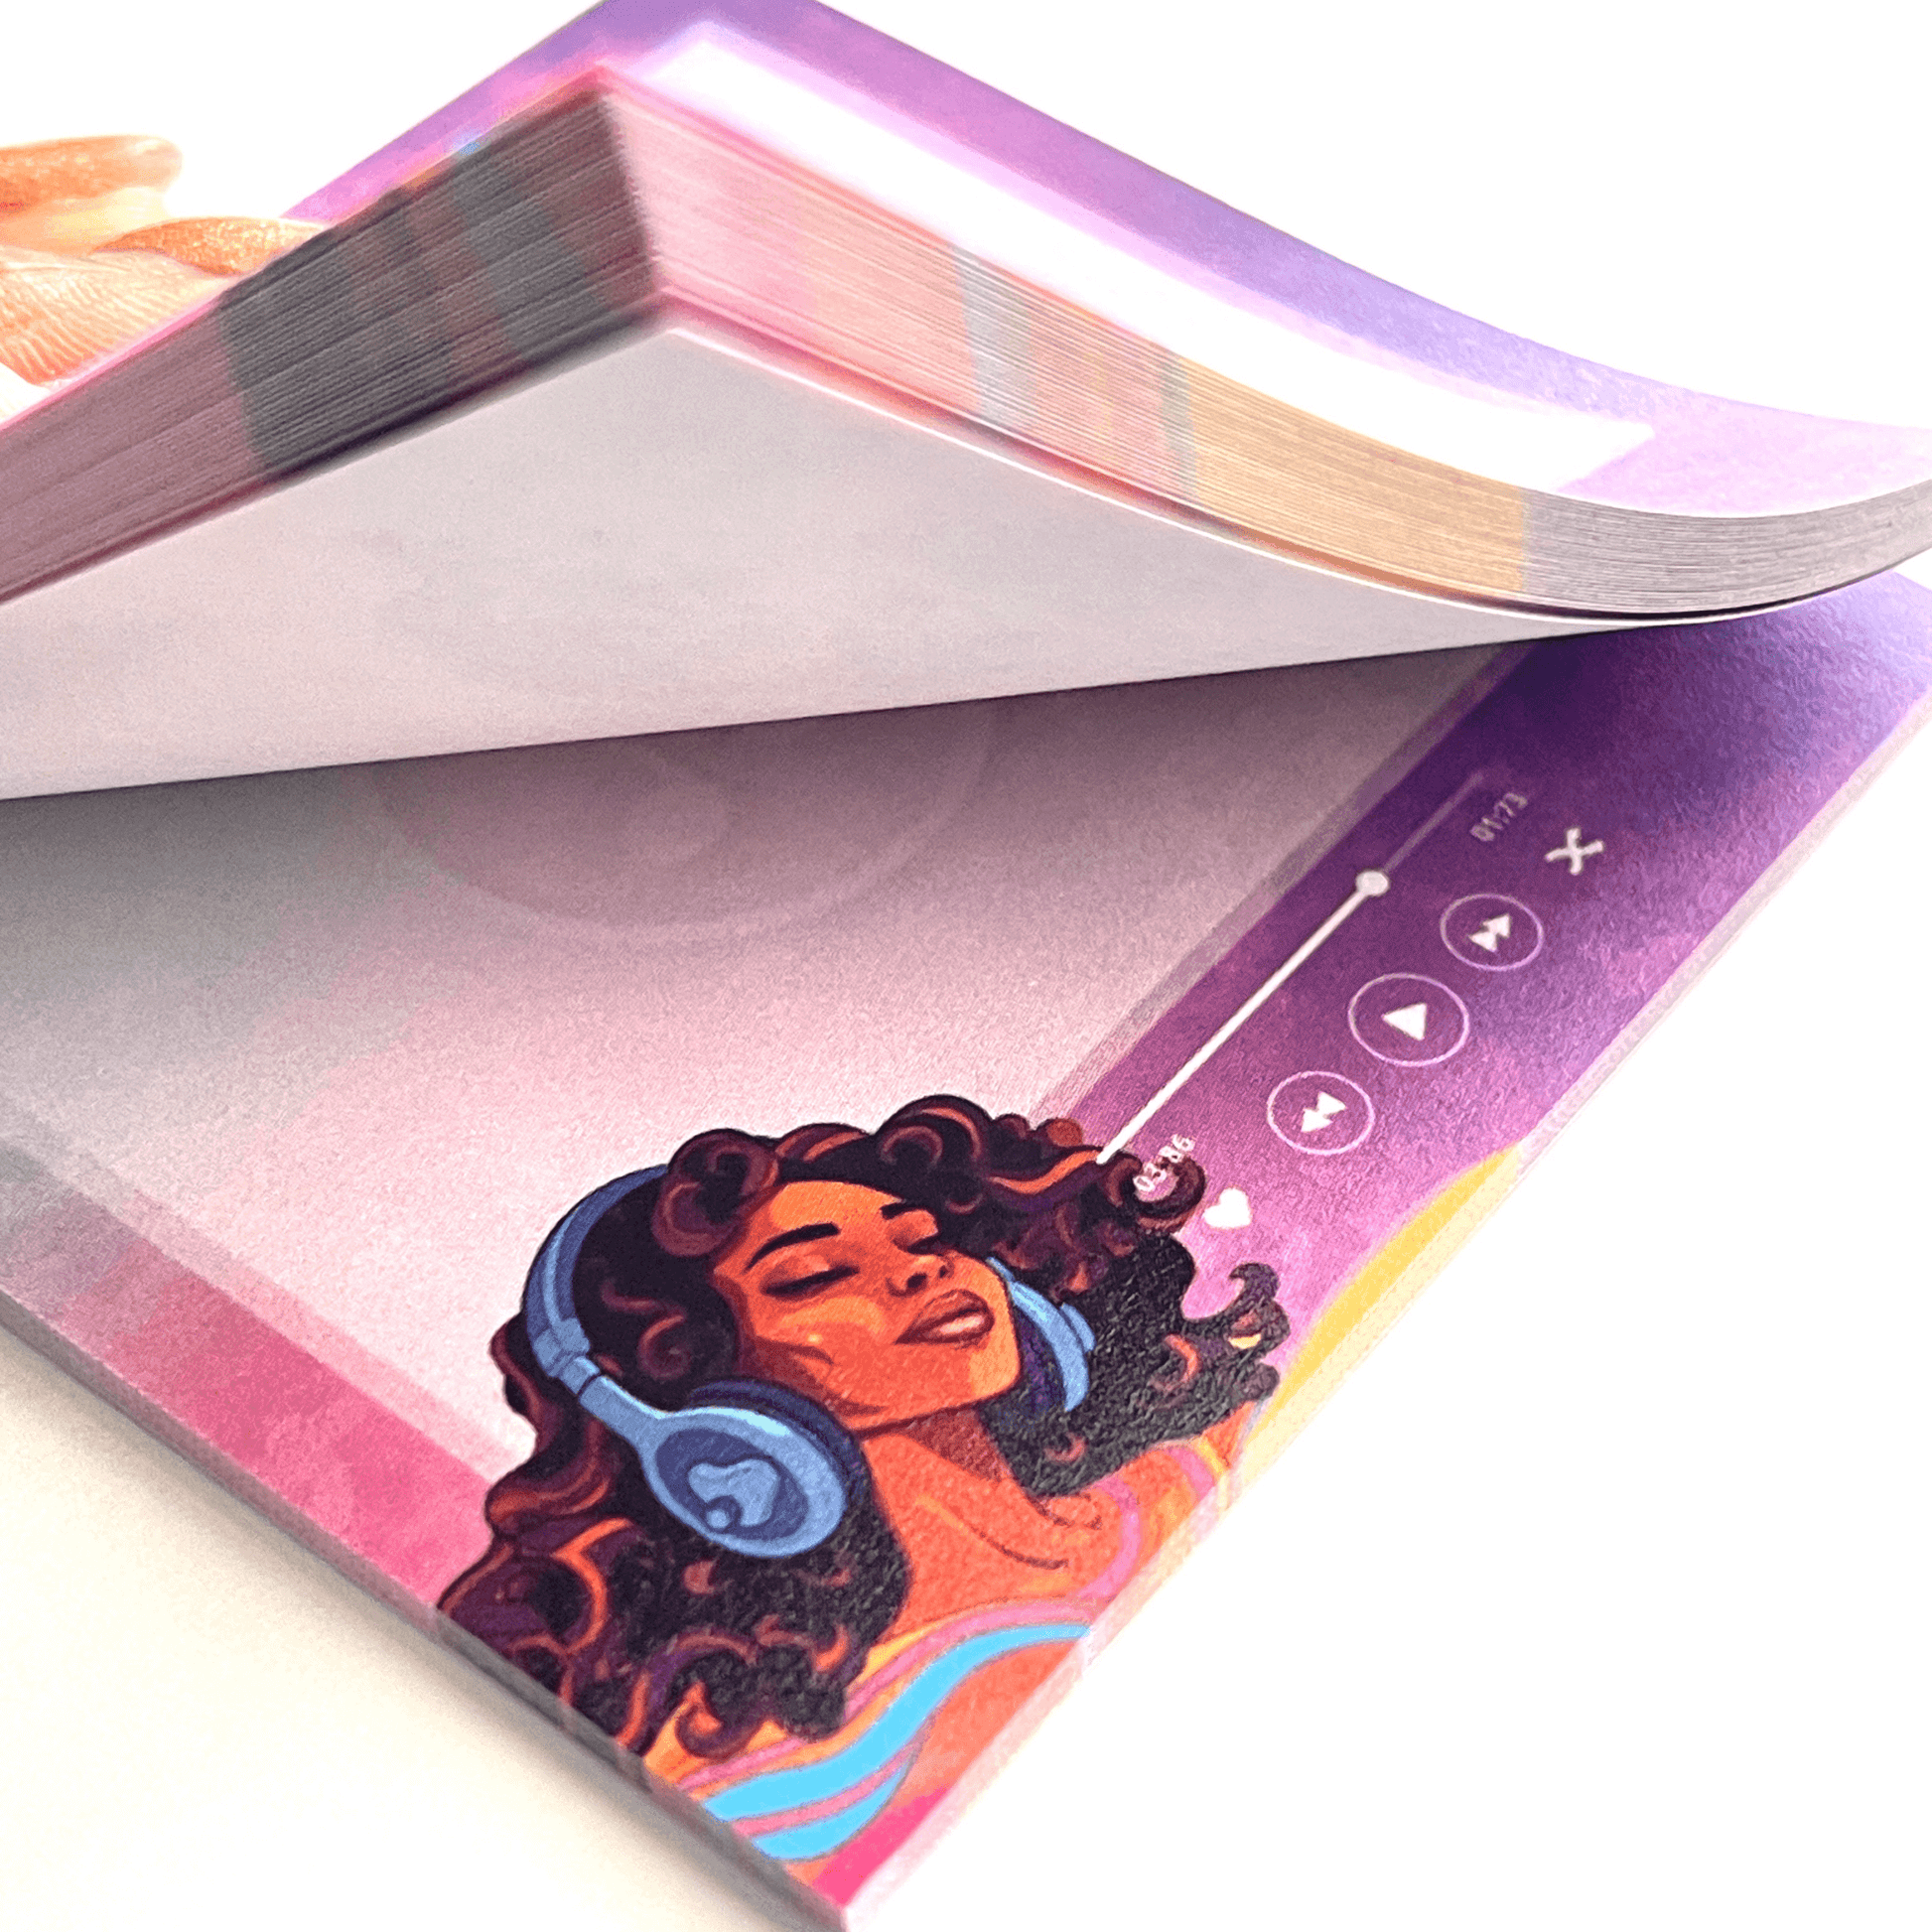 Post-it Notes for Readers, Black Women Gifts, Gift for a Black